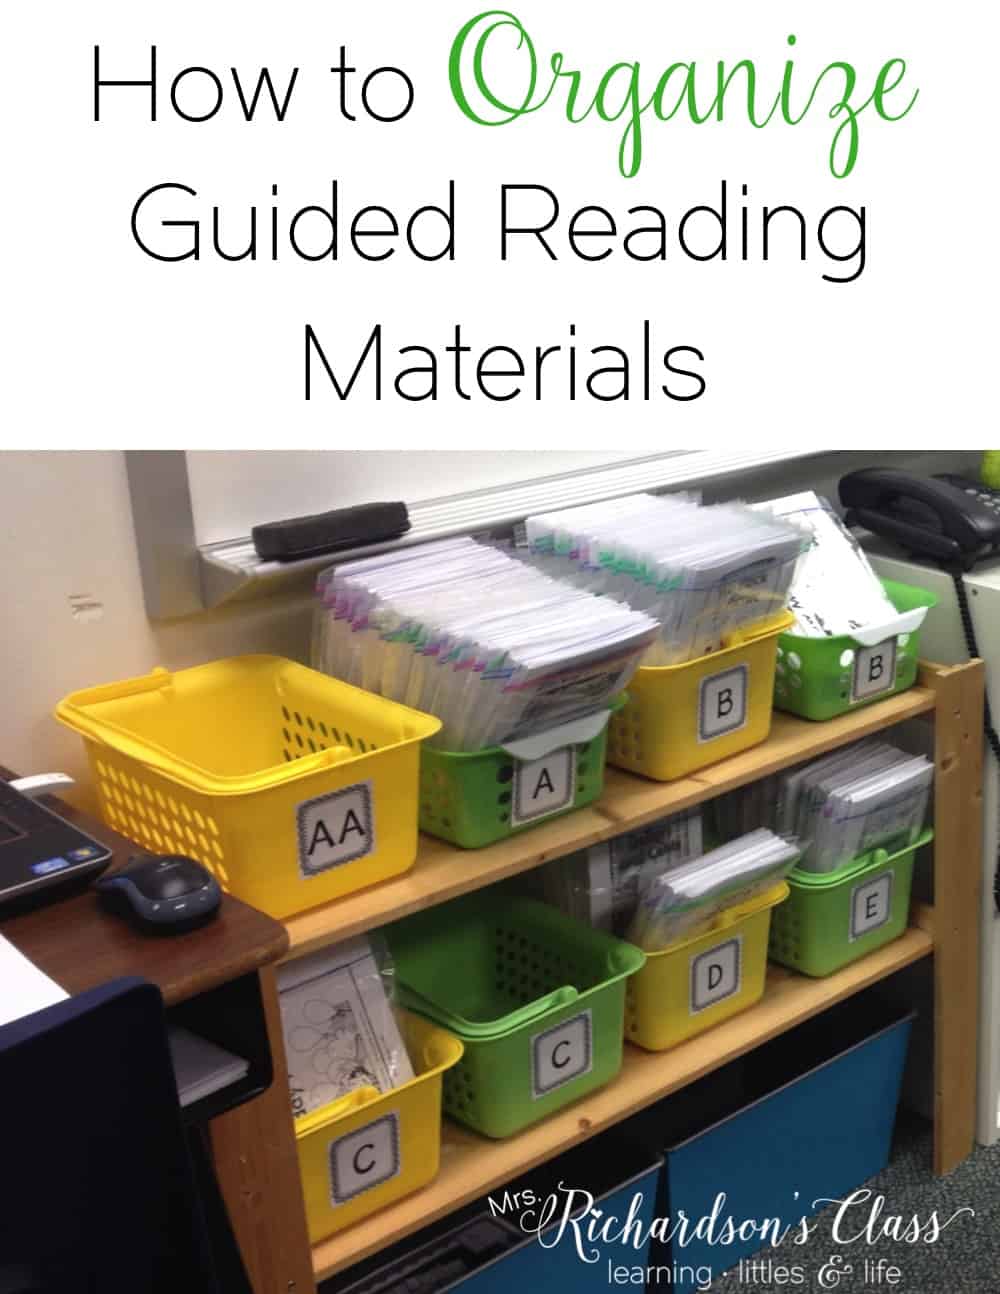 Organizing your guided reading material can be overwhelming. Come see how this teacher keeps it all together and organized in her classroom!